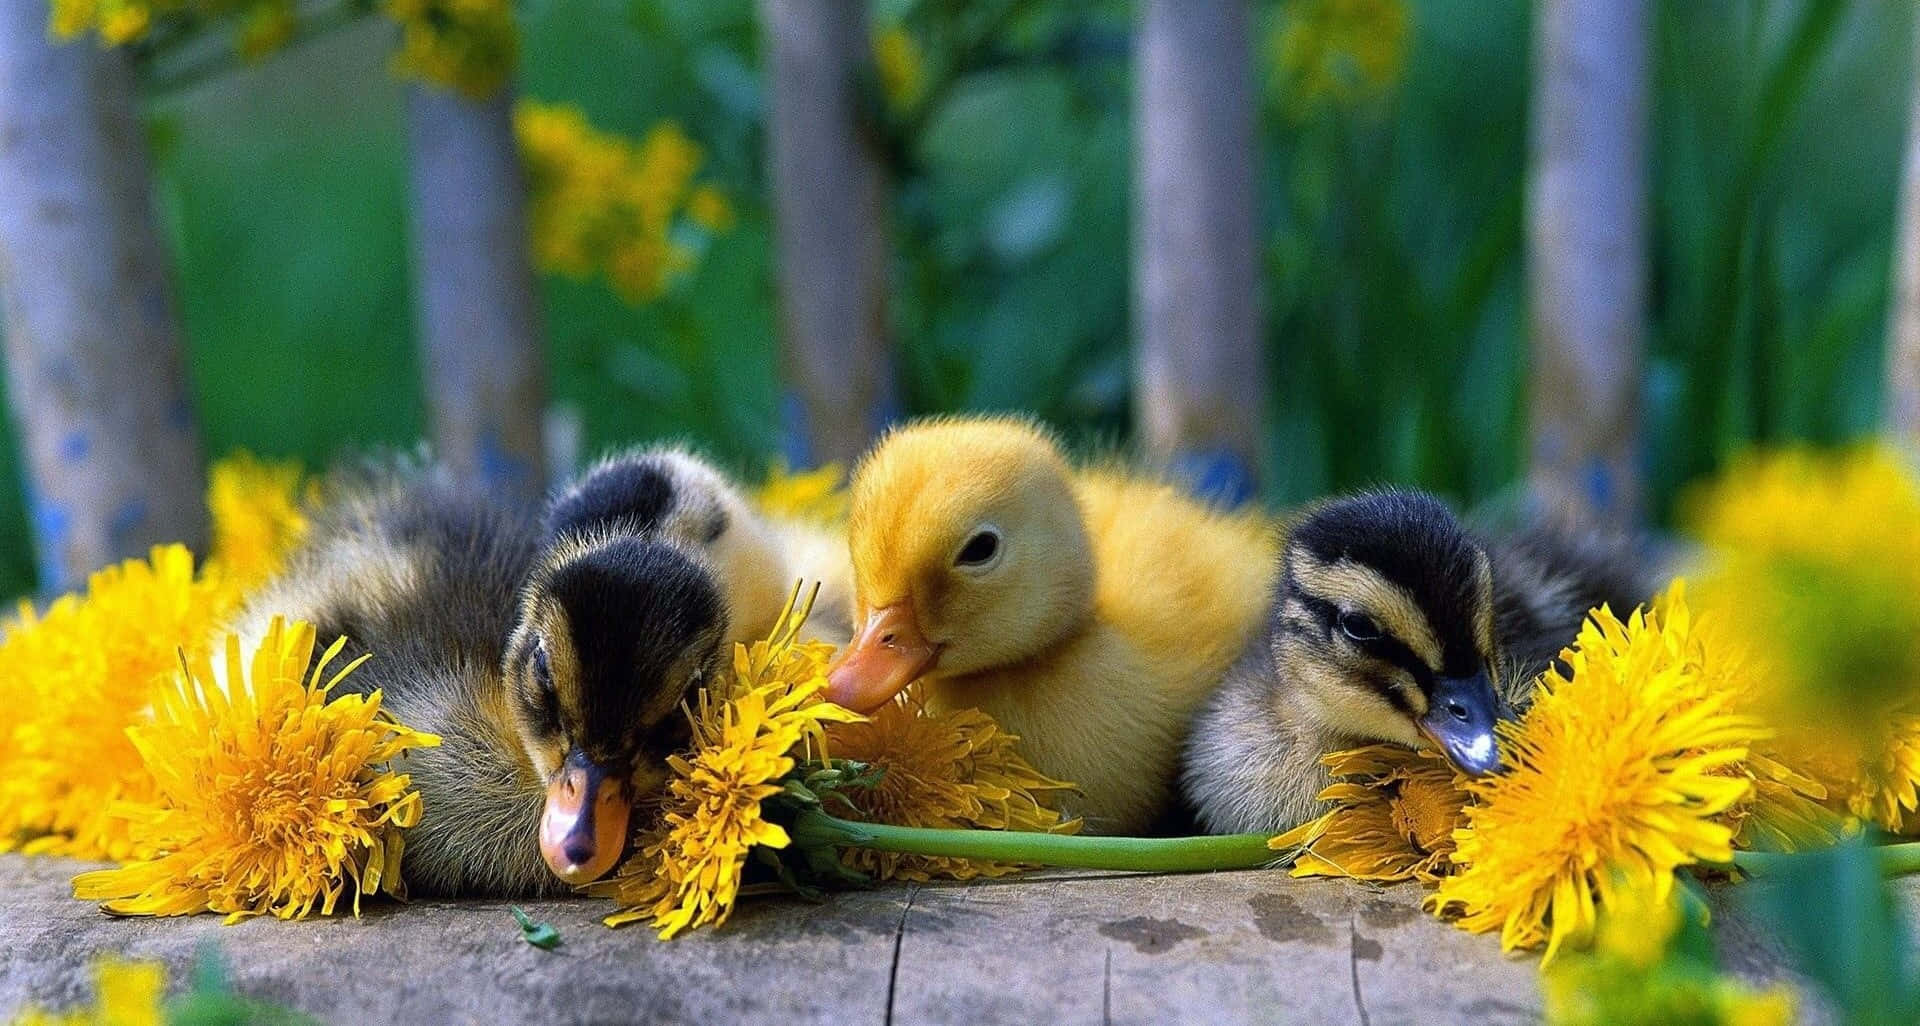 Cute Animal Ducklings Picture